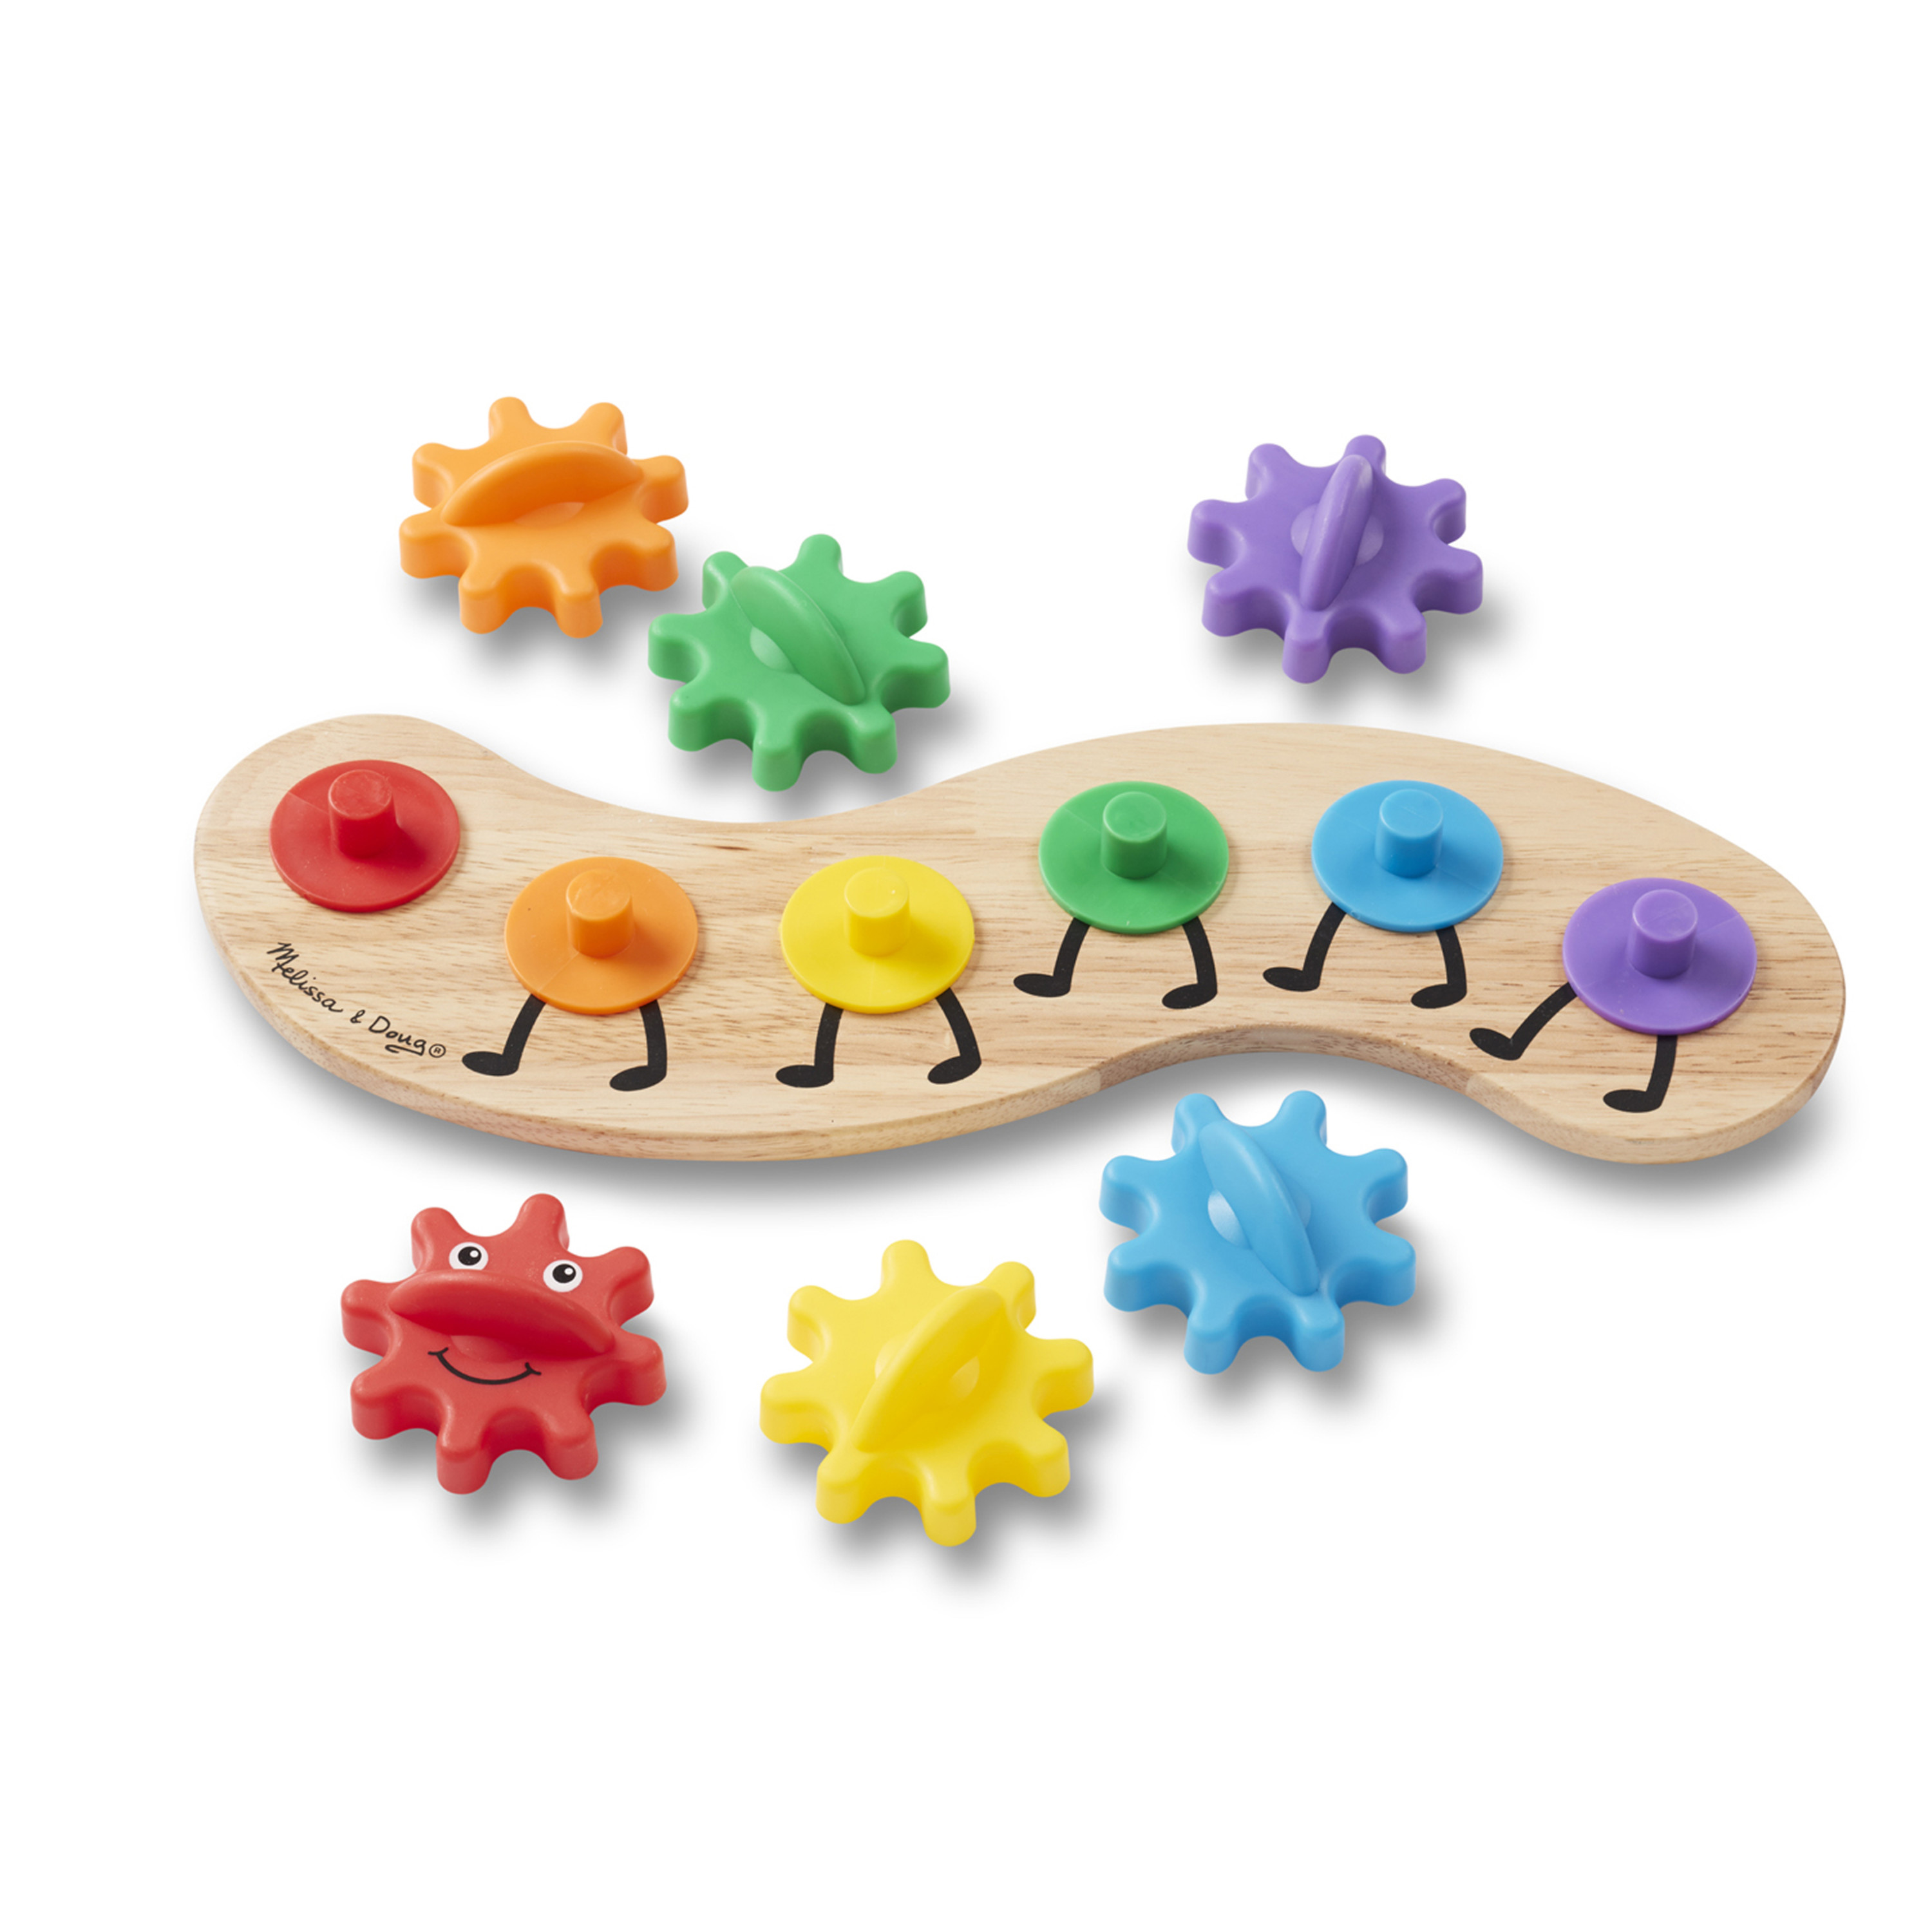 Melissa & Doug Wooden Rainbow Caterpillar Gears Toddler Toy With 6 Interchangeable Gears - image 5 of 10